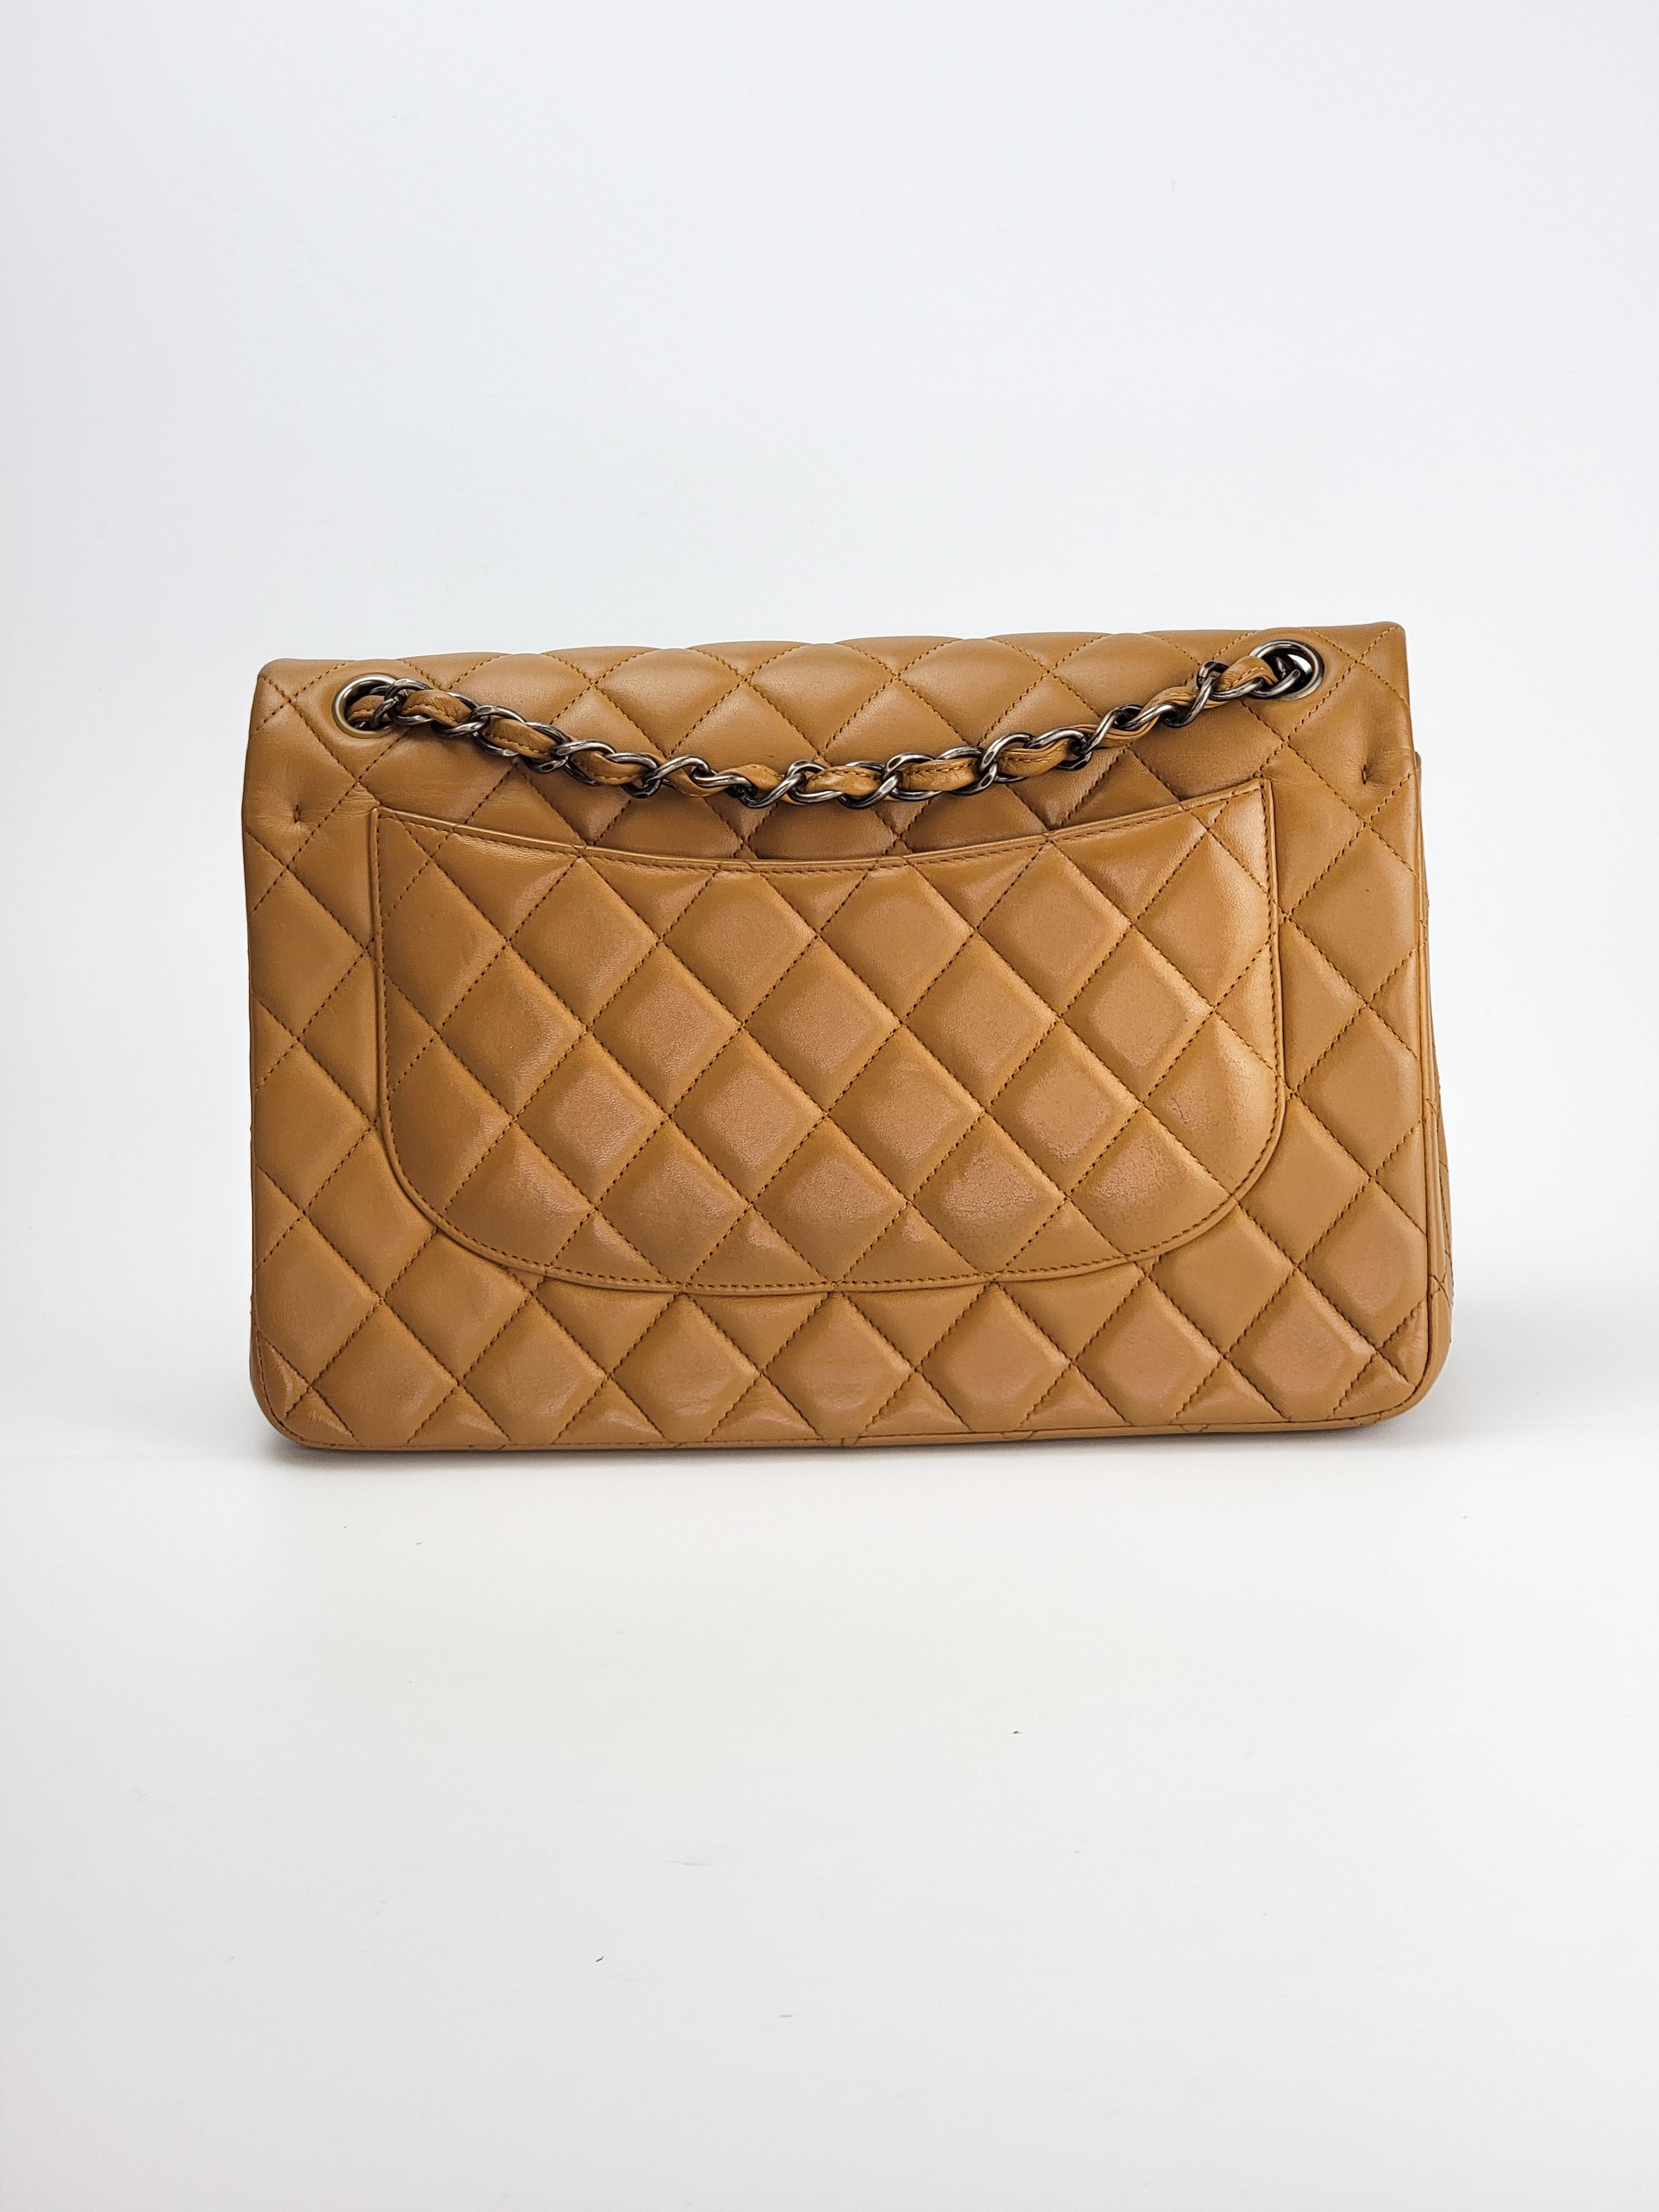 Chanel Classic Caramel - 8 For Sale on 1stDibs